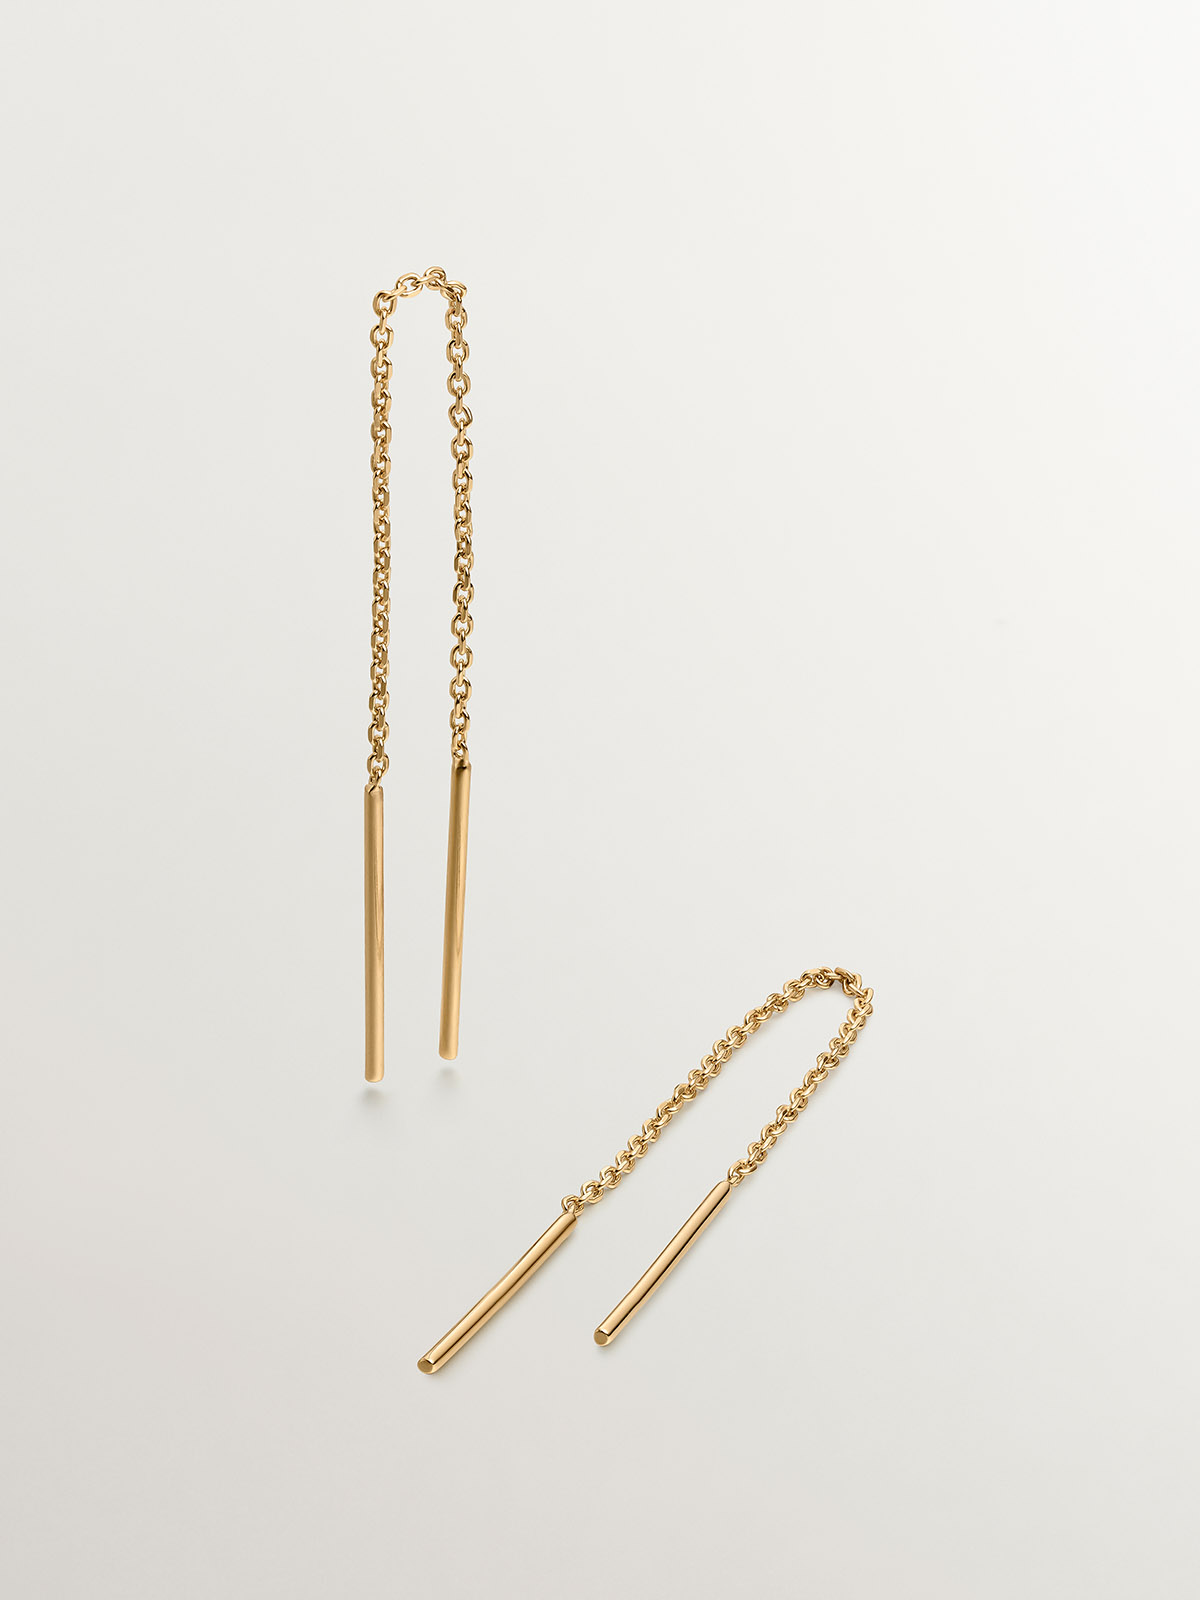 Long 925 silver chain earrings bathed in 18K yellow gold.